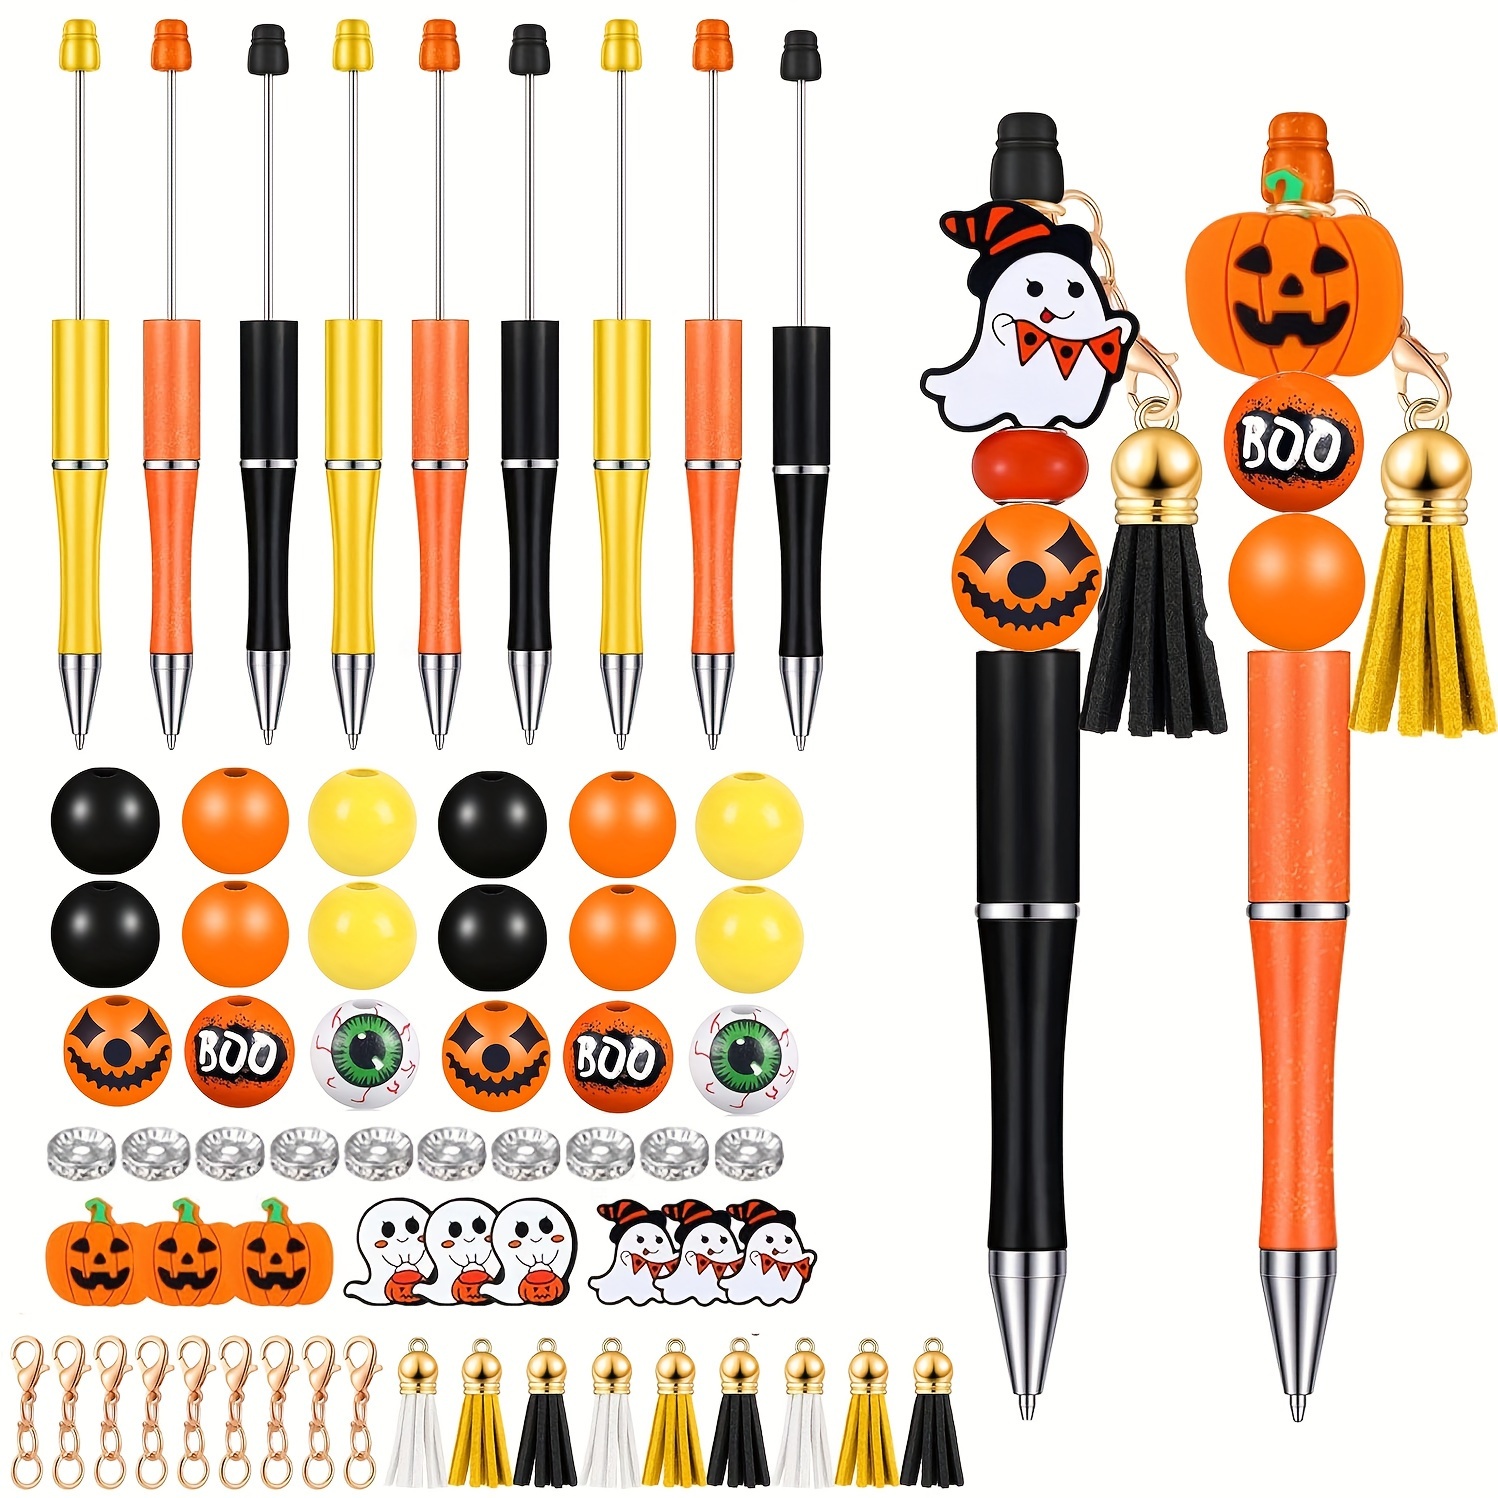 

Halloween Beaded Ballpoint Pen Kit - 9 Piece Set With Tassels And Charms, Plastic Twist-action Rectangle Body, Medium Point For Diy Crafts, Suitable For Students And Office Use, Age 14+